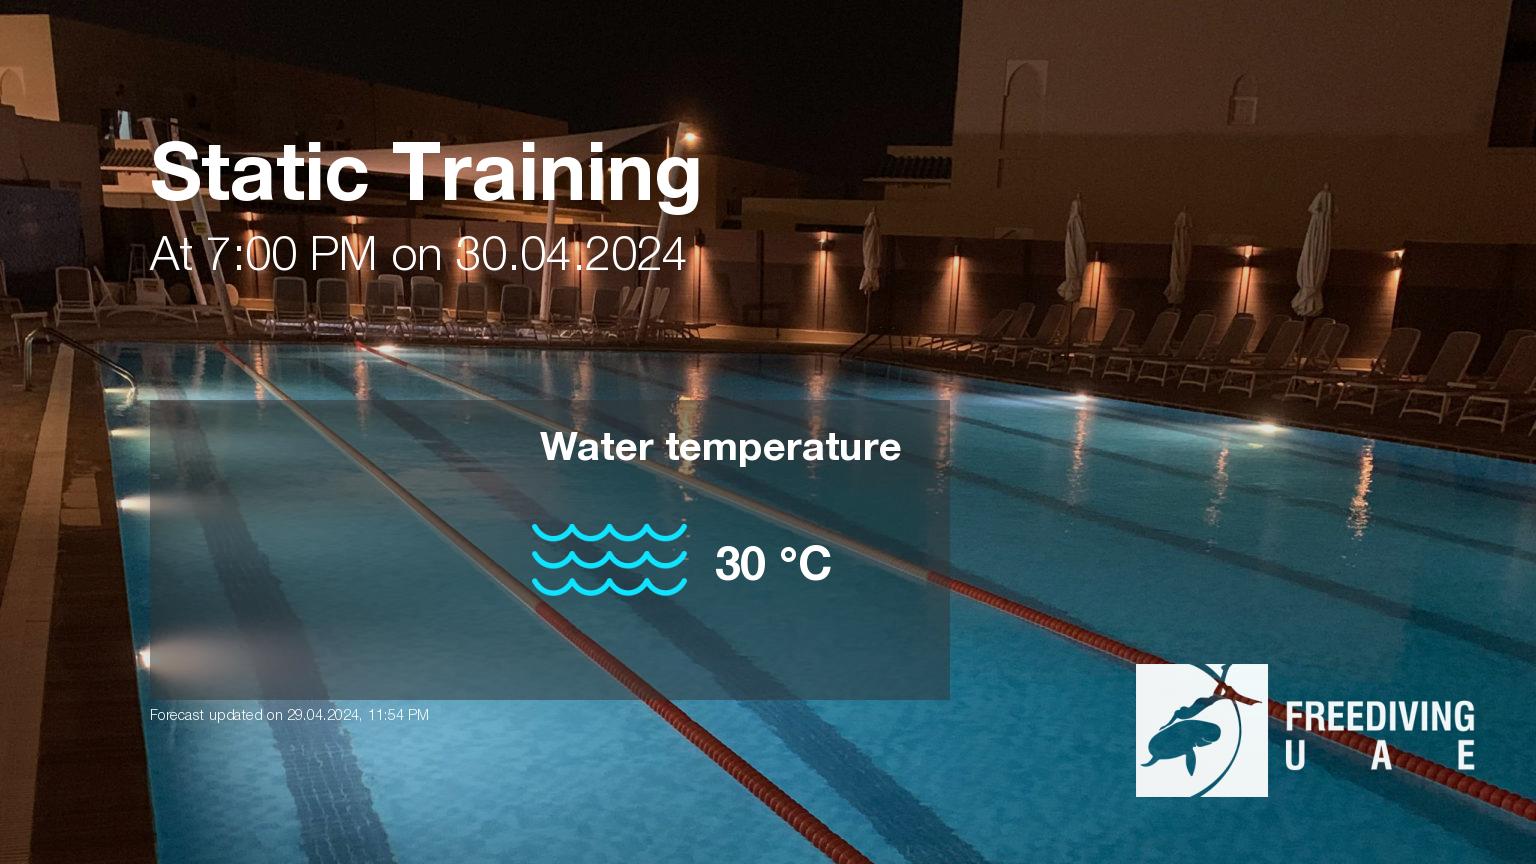 Expected weather during Static Training on Tue, Apr 30, at 7:00 PM